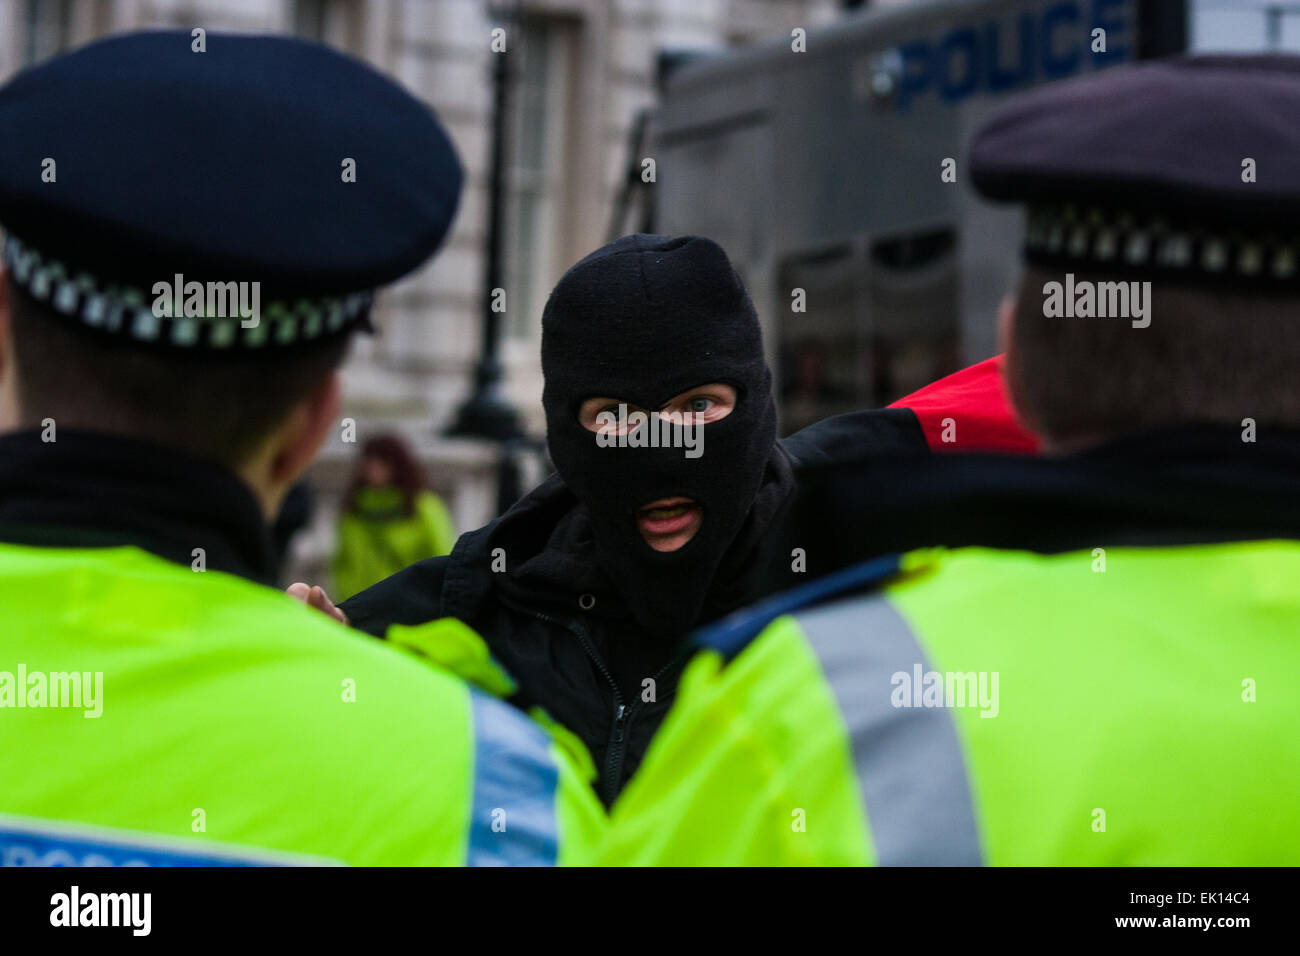 Whitehall, London, April 4th 2015. As PEGIDA UK holds a poorly attended rally on Whitehall, scores of police are called in to contain counter protesters from various London anti-fascist movements. PICTURED: A masked anti-fascist counter-protester taunts police officers Credit:  Paul Davey/Alamy Live News Stock Photo